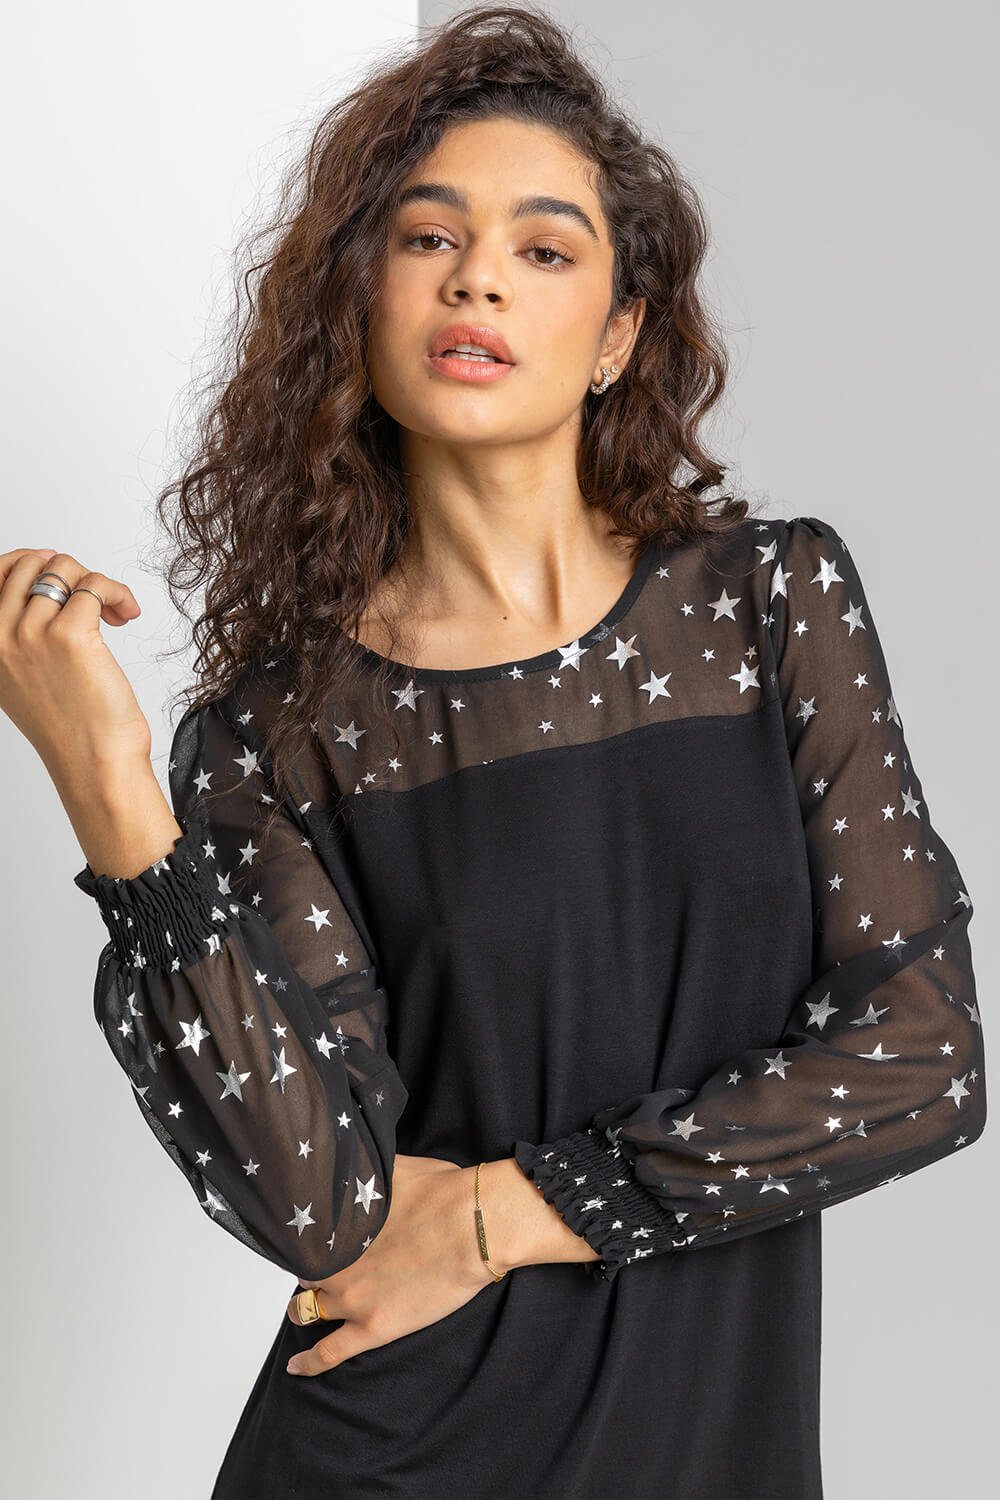 Silver Foil Star Print Contrast Top, Image 4 of 4